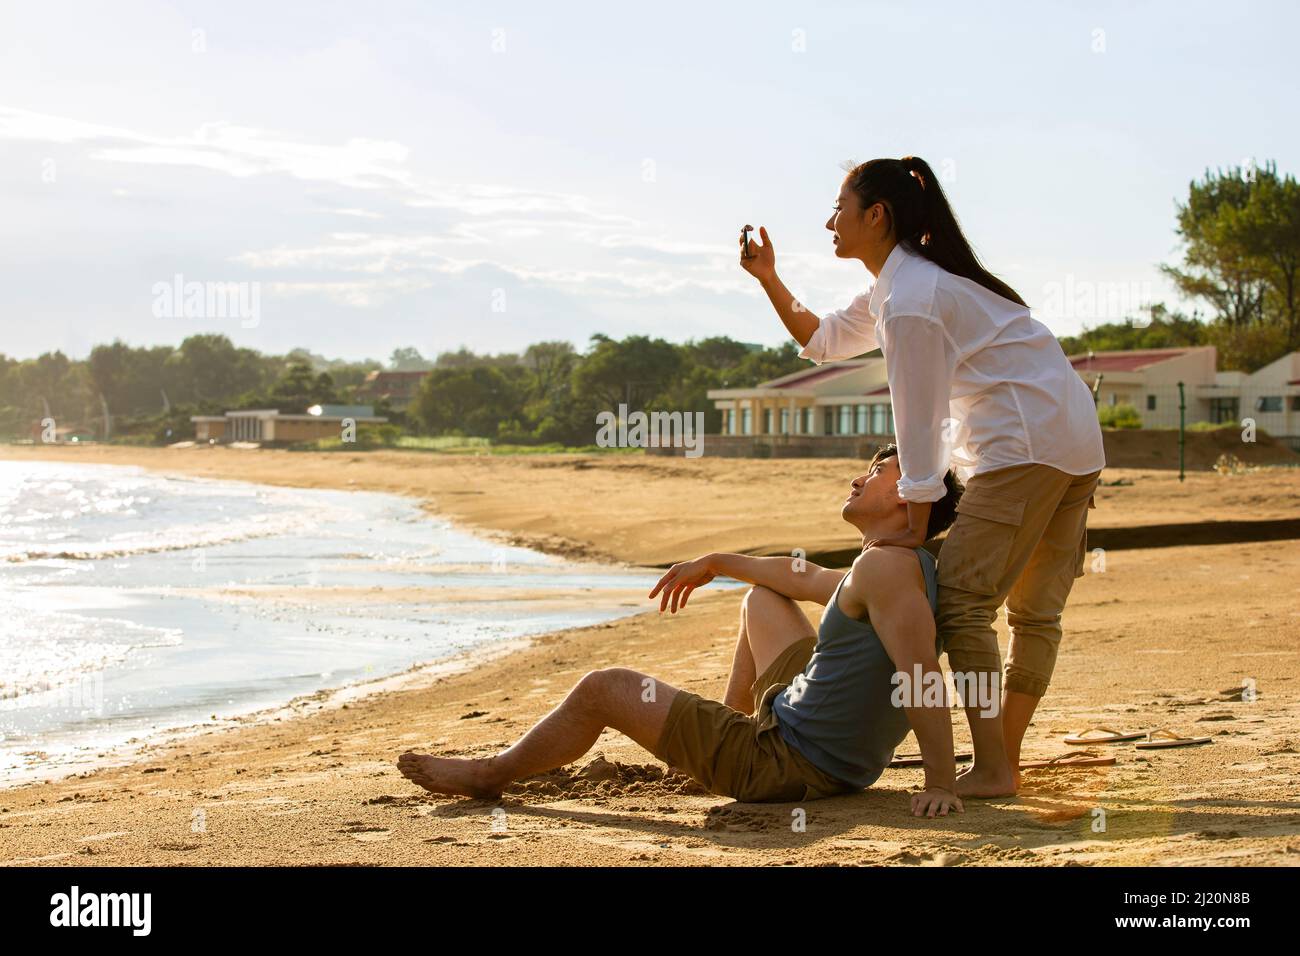 A young couple taking pictures on a summer beach - stock photo Stock Photo